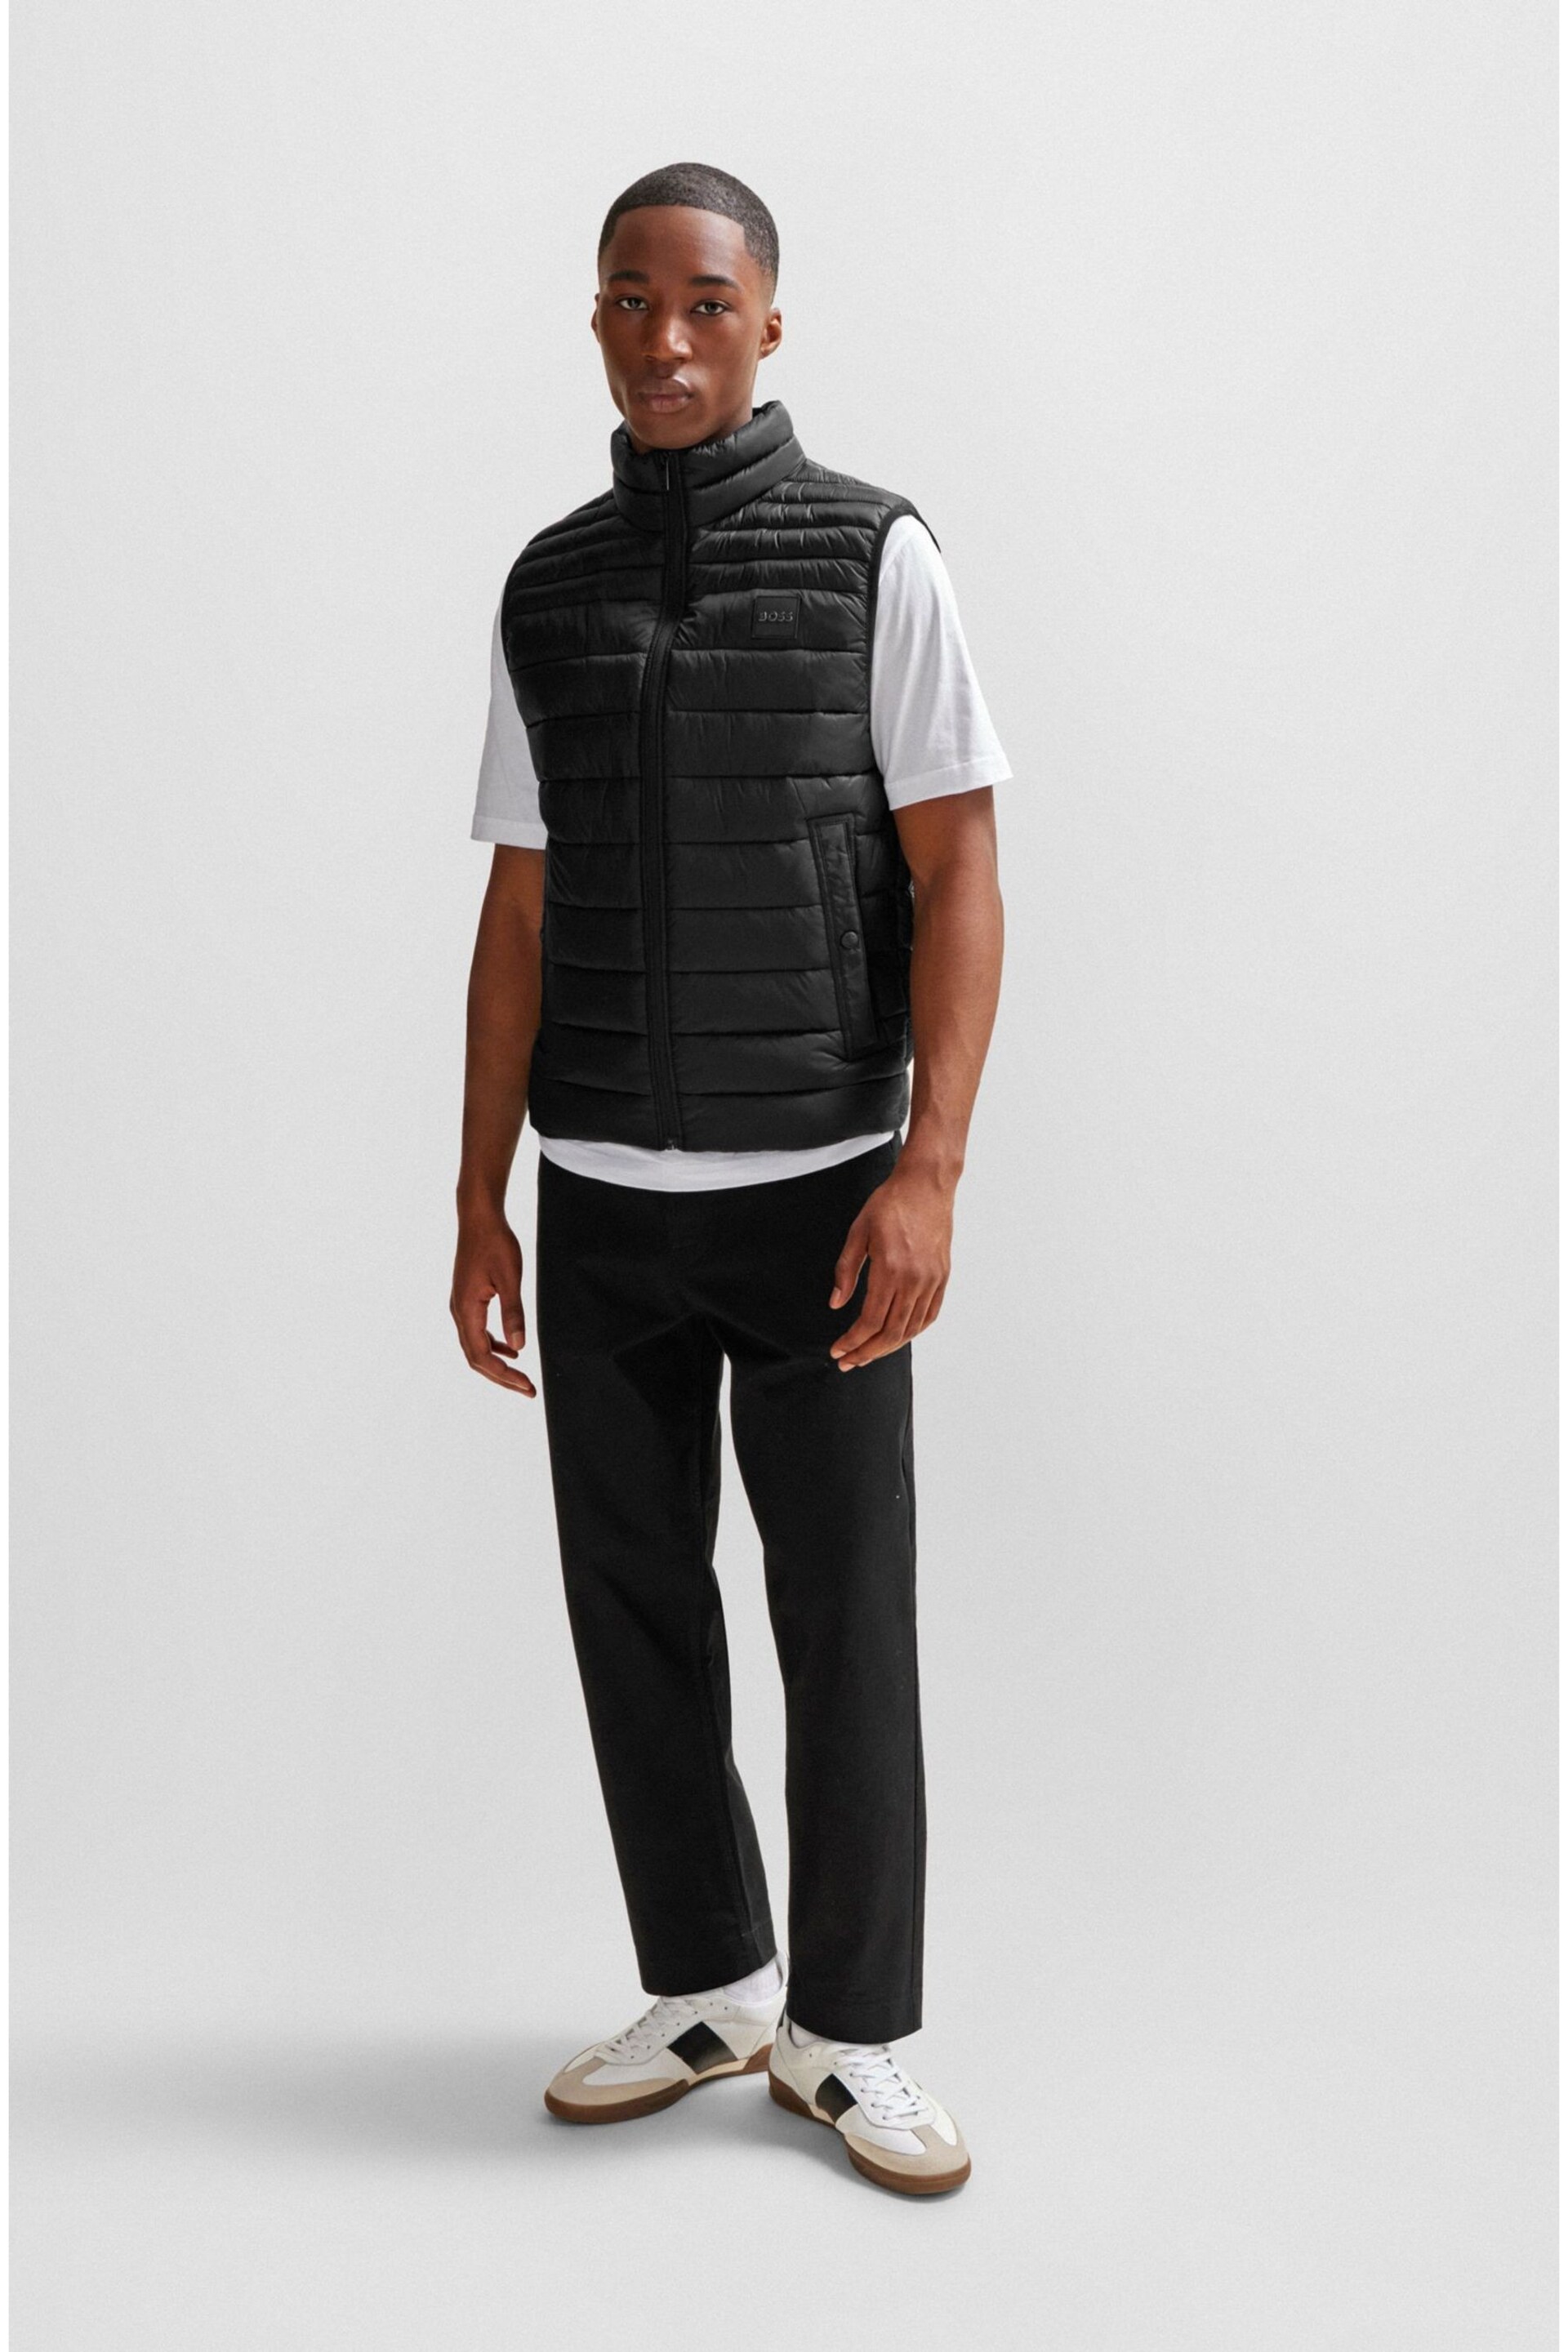 BOSS Black Lightweight Padded Gilet With Water-Repellent Finish - Image 3 of 6